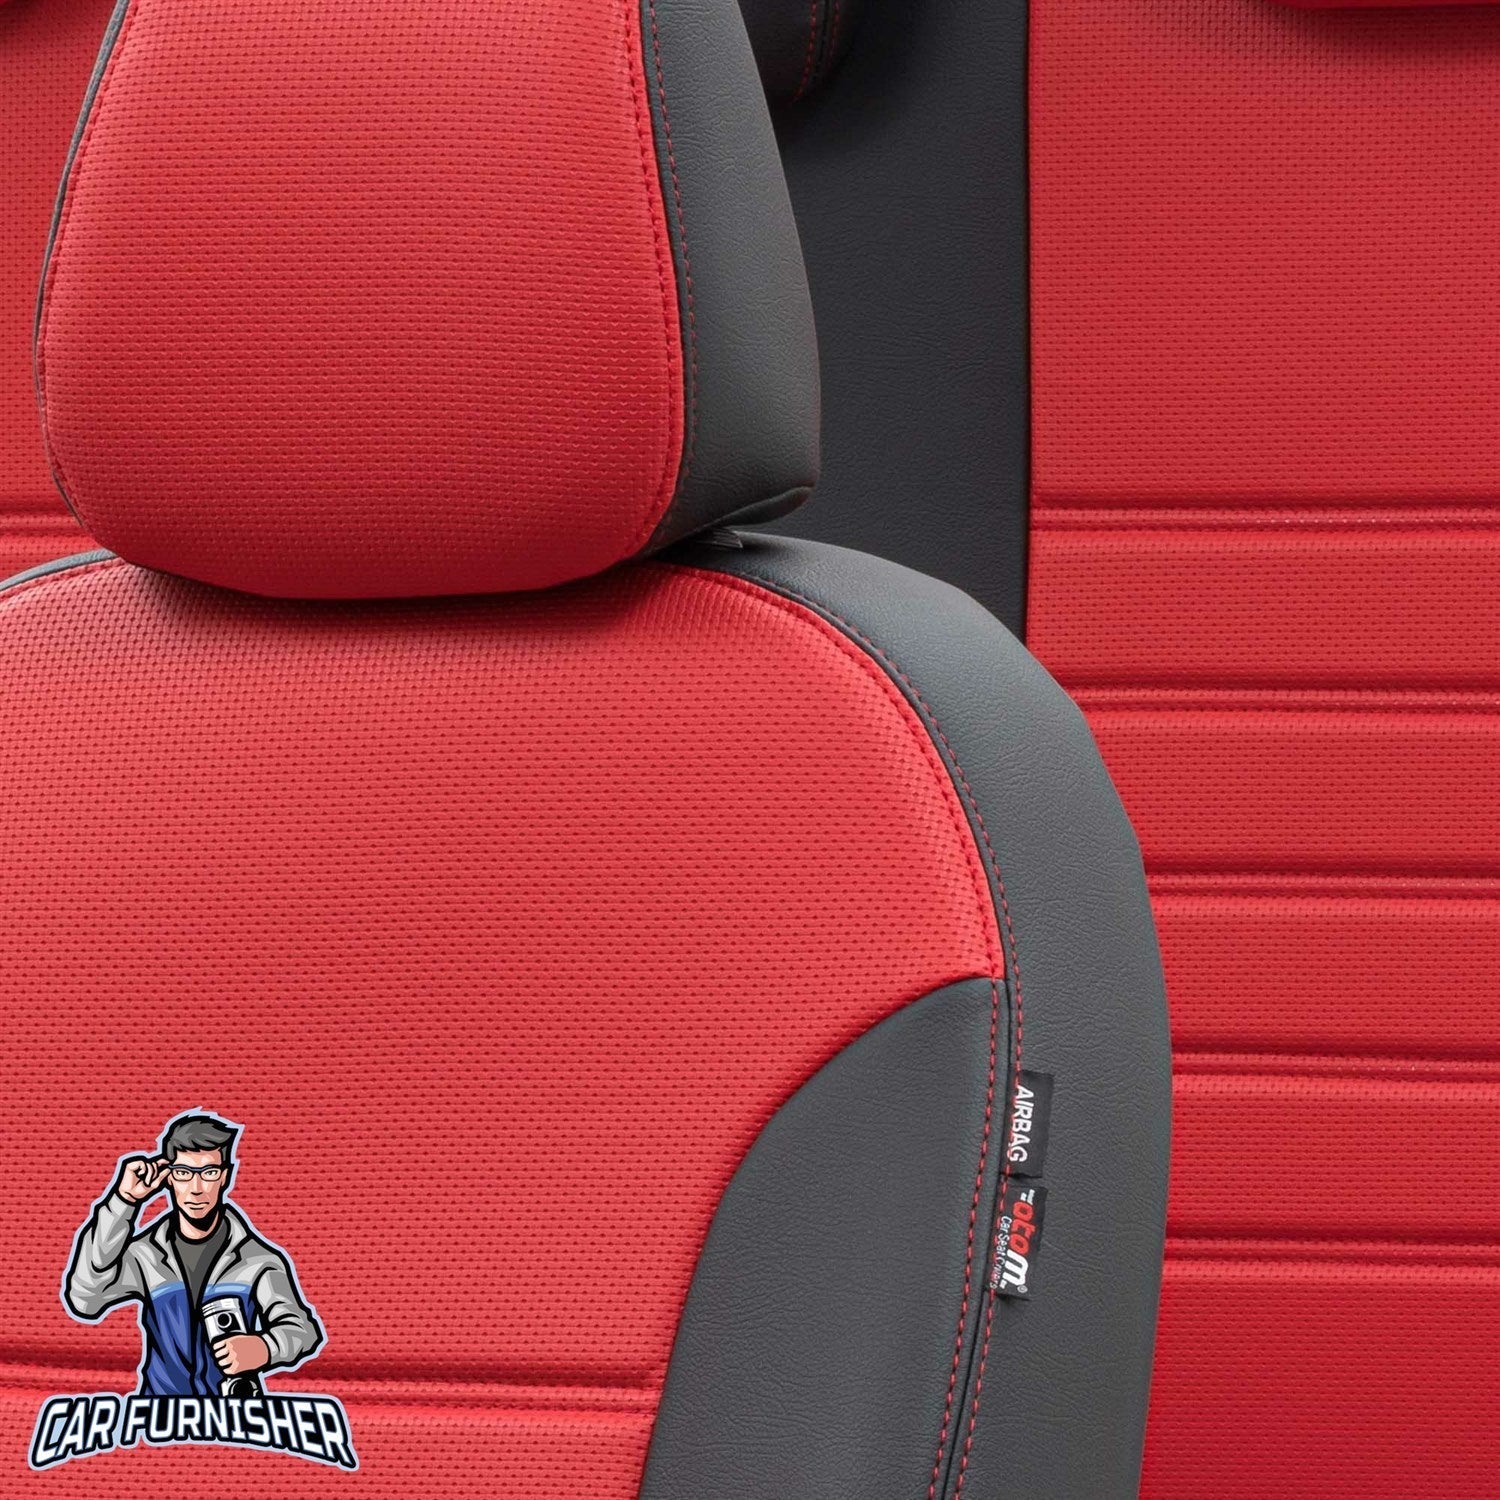 Ford Ranger Seat Covers New York Leather Design Red Leather